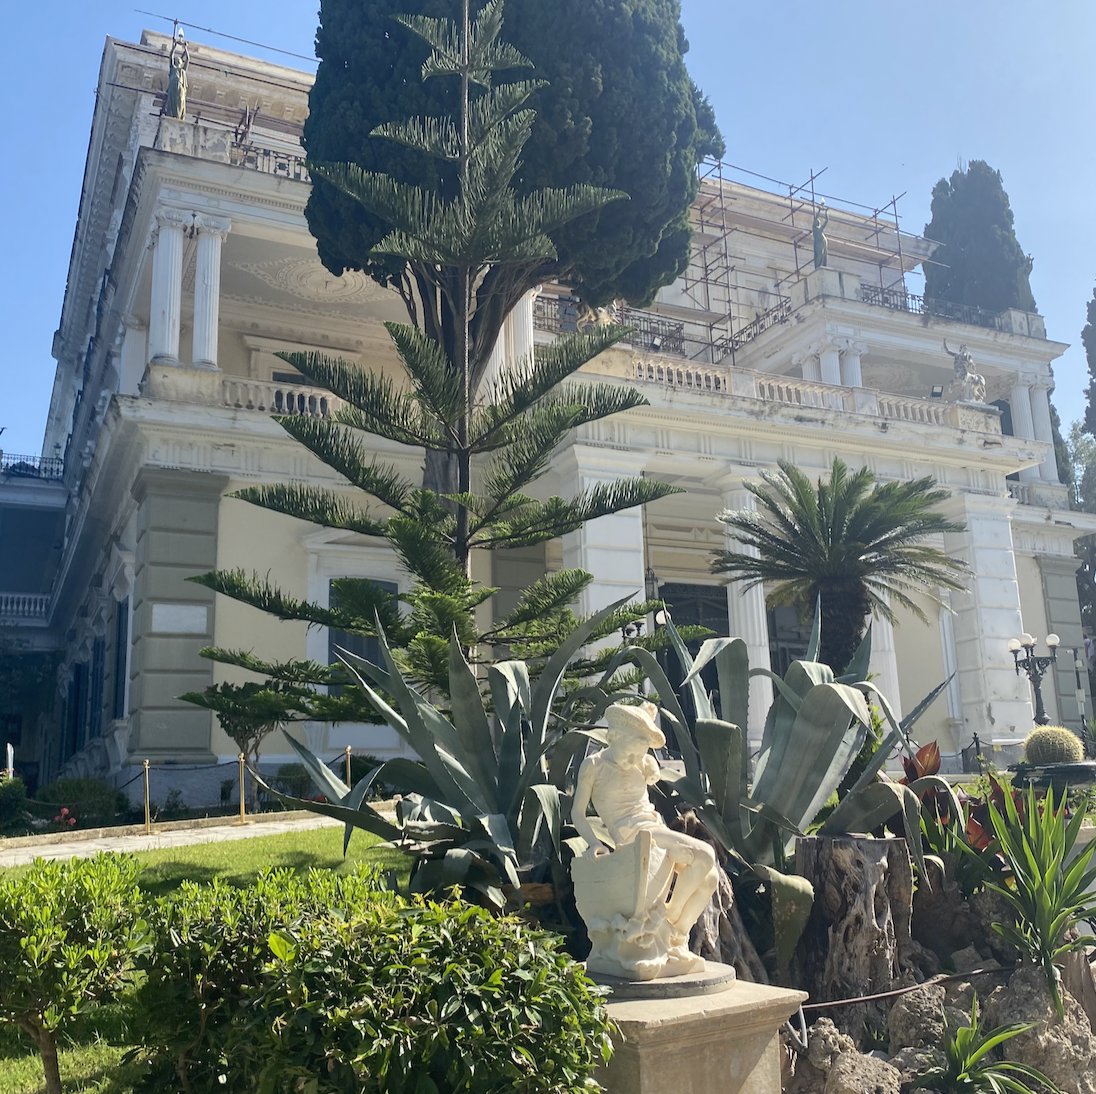 The header image in my 'Muses vs Sirens' article about the future of AI relationships is from the Achilleion Palace in Corfu, Greece. Yesterday I got to visit the Achilleion, and see the row of muses for myself. May the AI muses be kind to us.